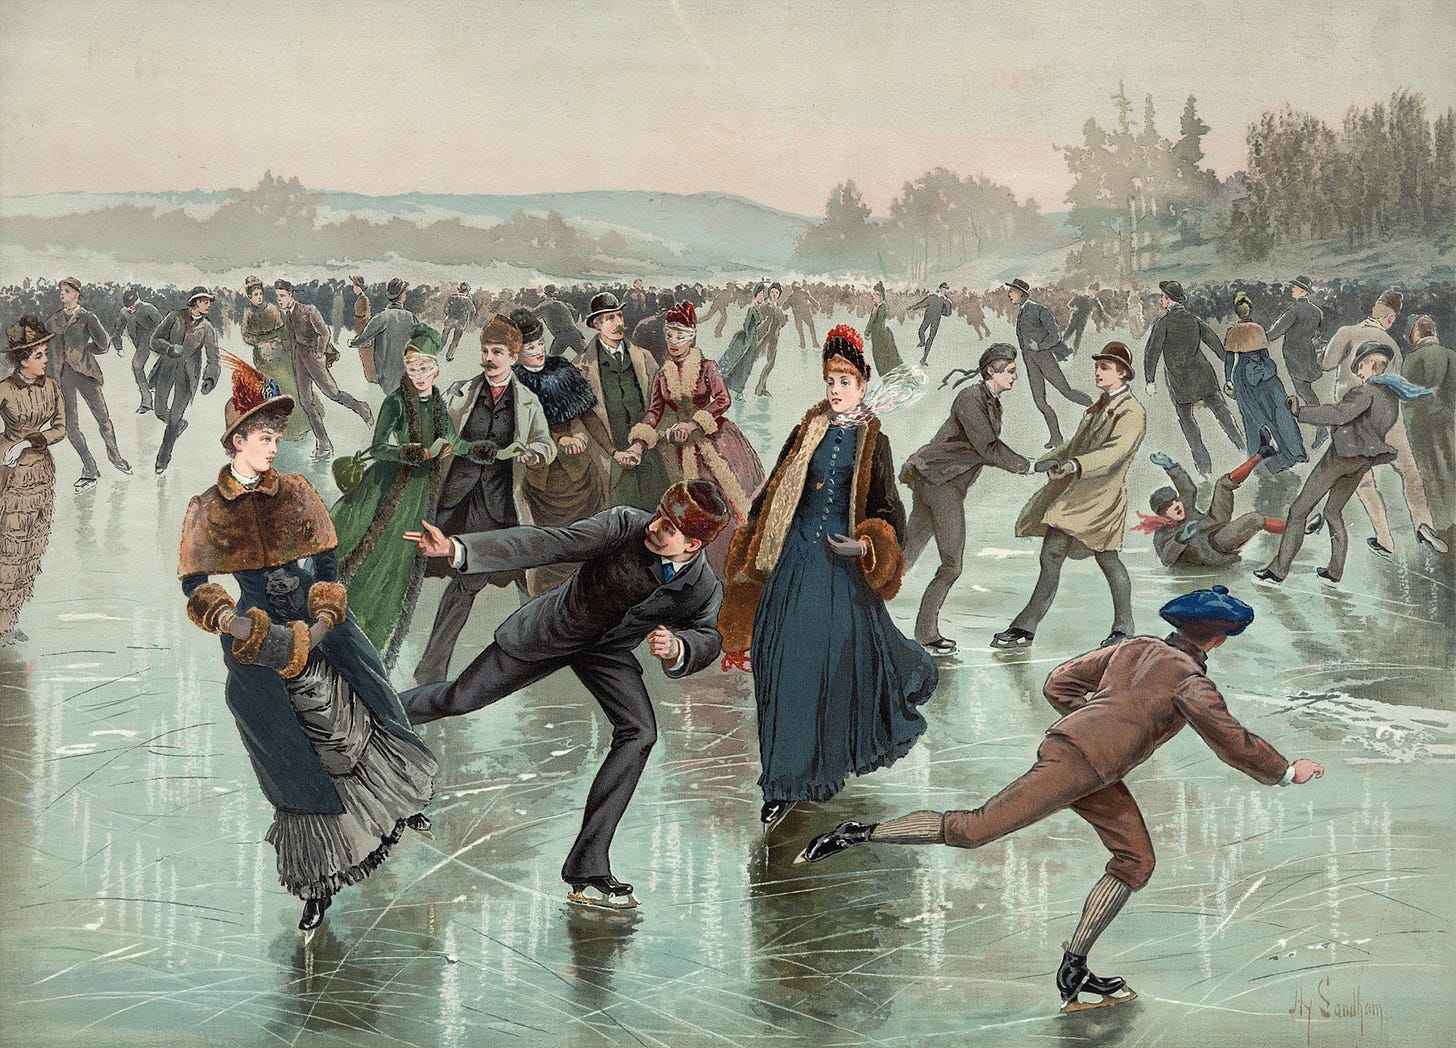 19th century illustration of people skating on a pond or river